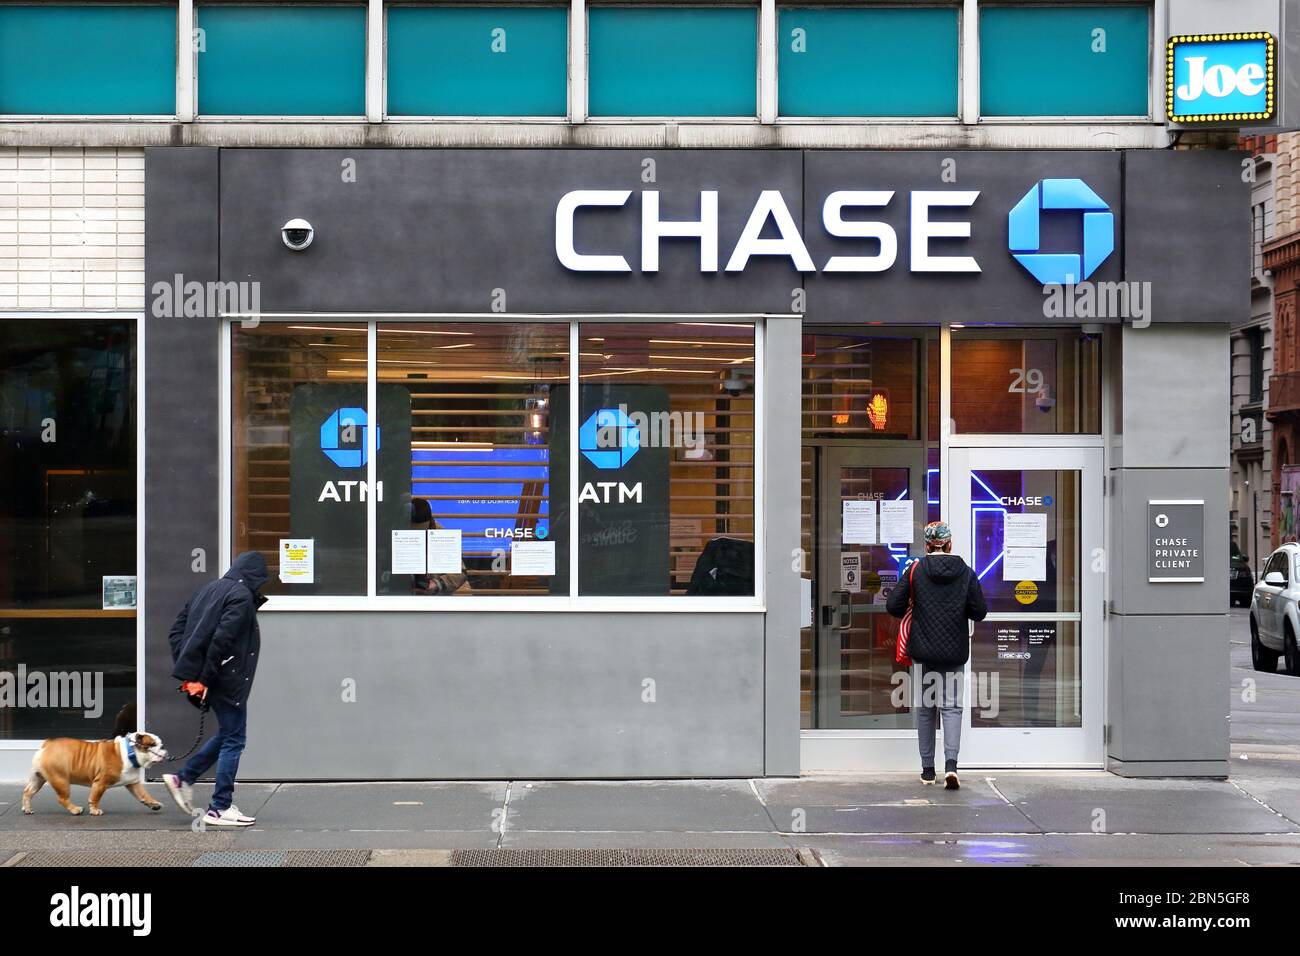 Chase Bank (JPMorgan Chase Bank), 29 Union Square West, New York, NYC Schaufensterfoto einer Bankfiliale am Union Square. Stockfoto